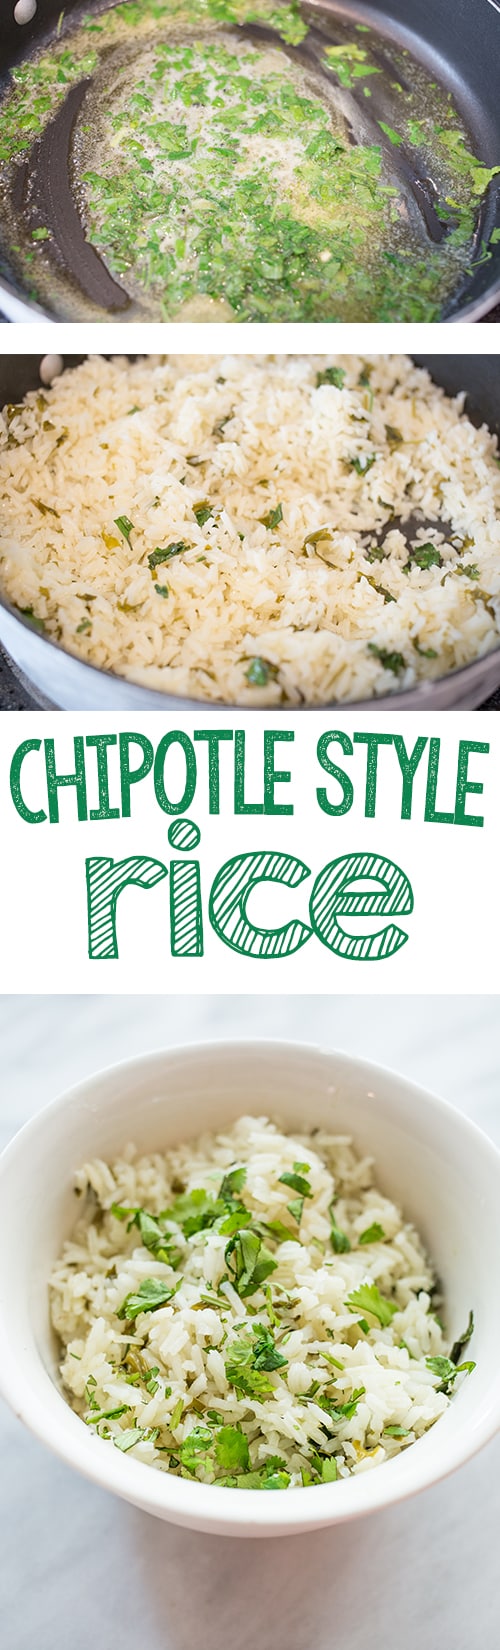 Chipotle style rice- this delicious cilantro rice tastes just like chipotles and is so easy to make!